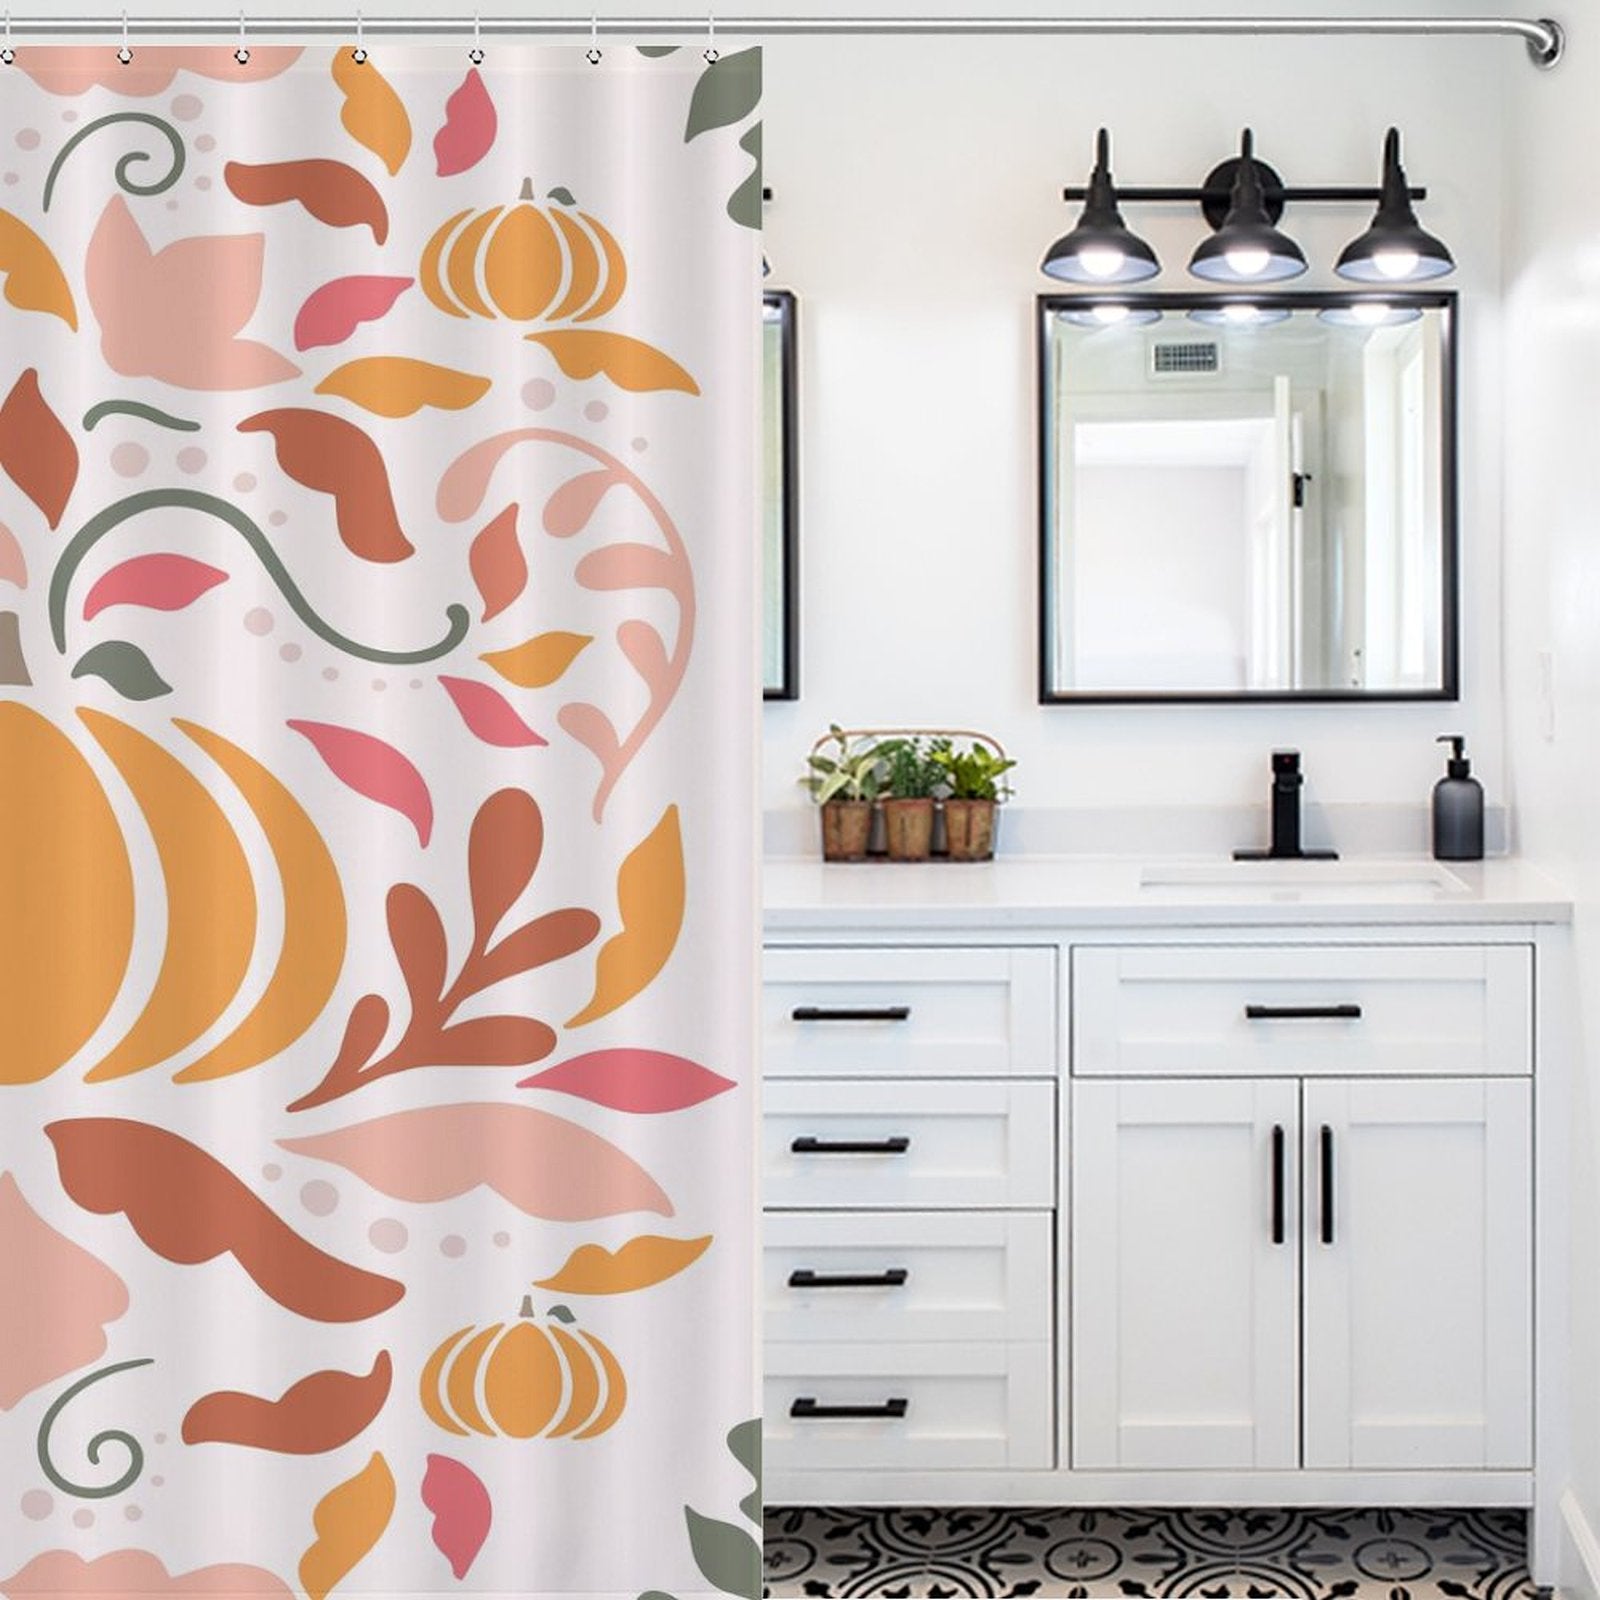 A Bohemian bathroom with a white vanity, black fixtures, potted plants, and a patterned shower curtain featuring the Boho Fall Pumpkins Pink Floral Shower Curtain-Cottoncat by Cotton Cat.